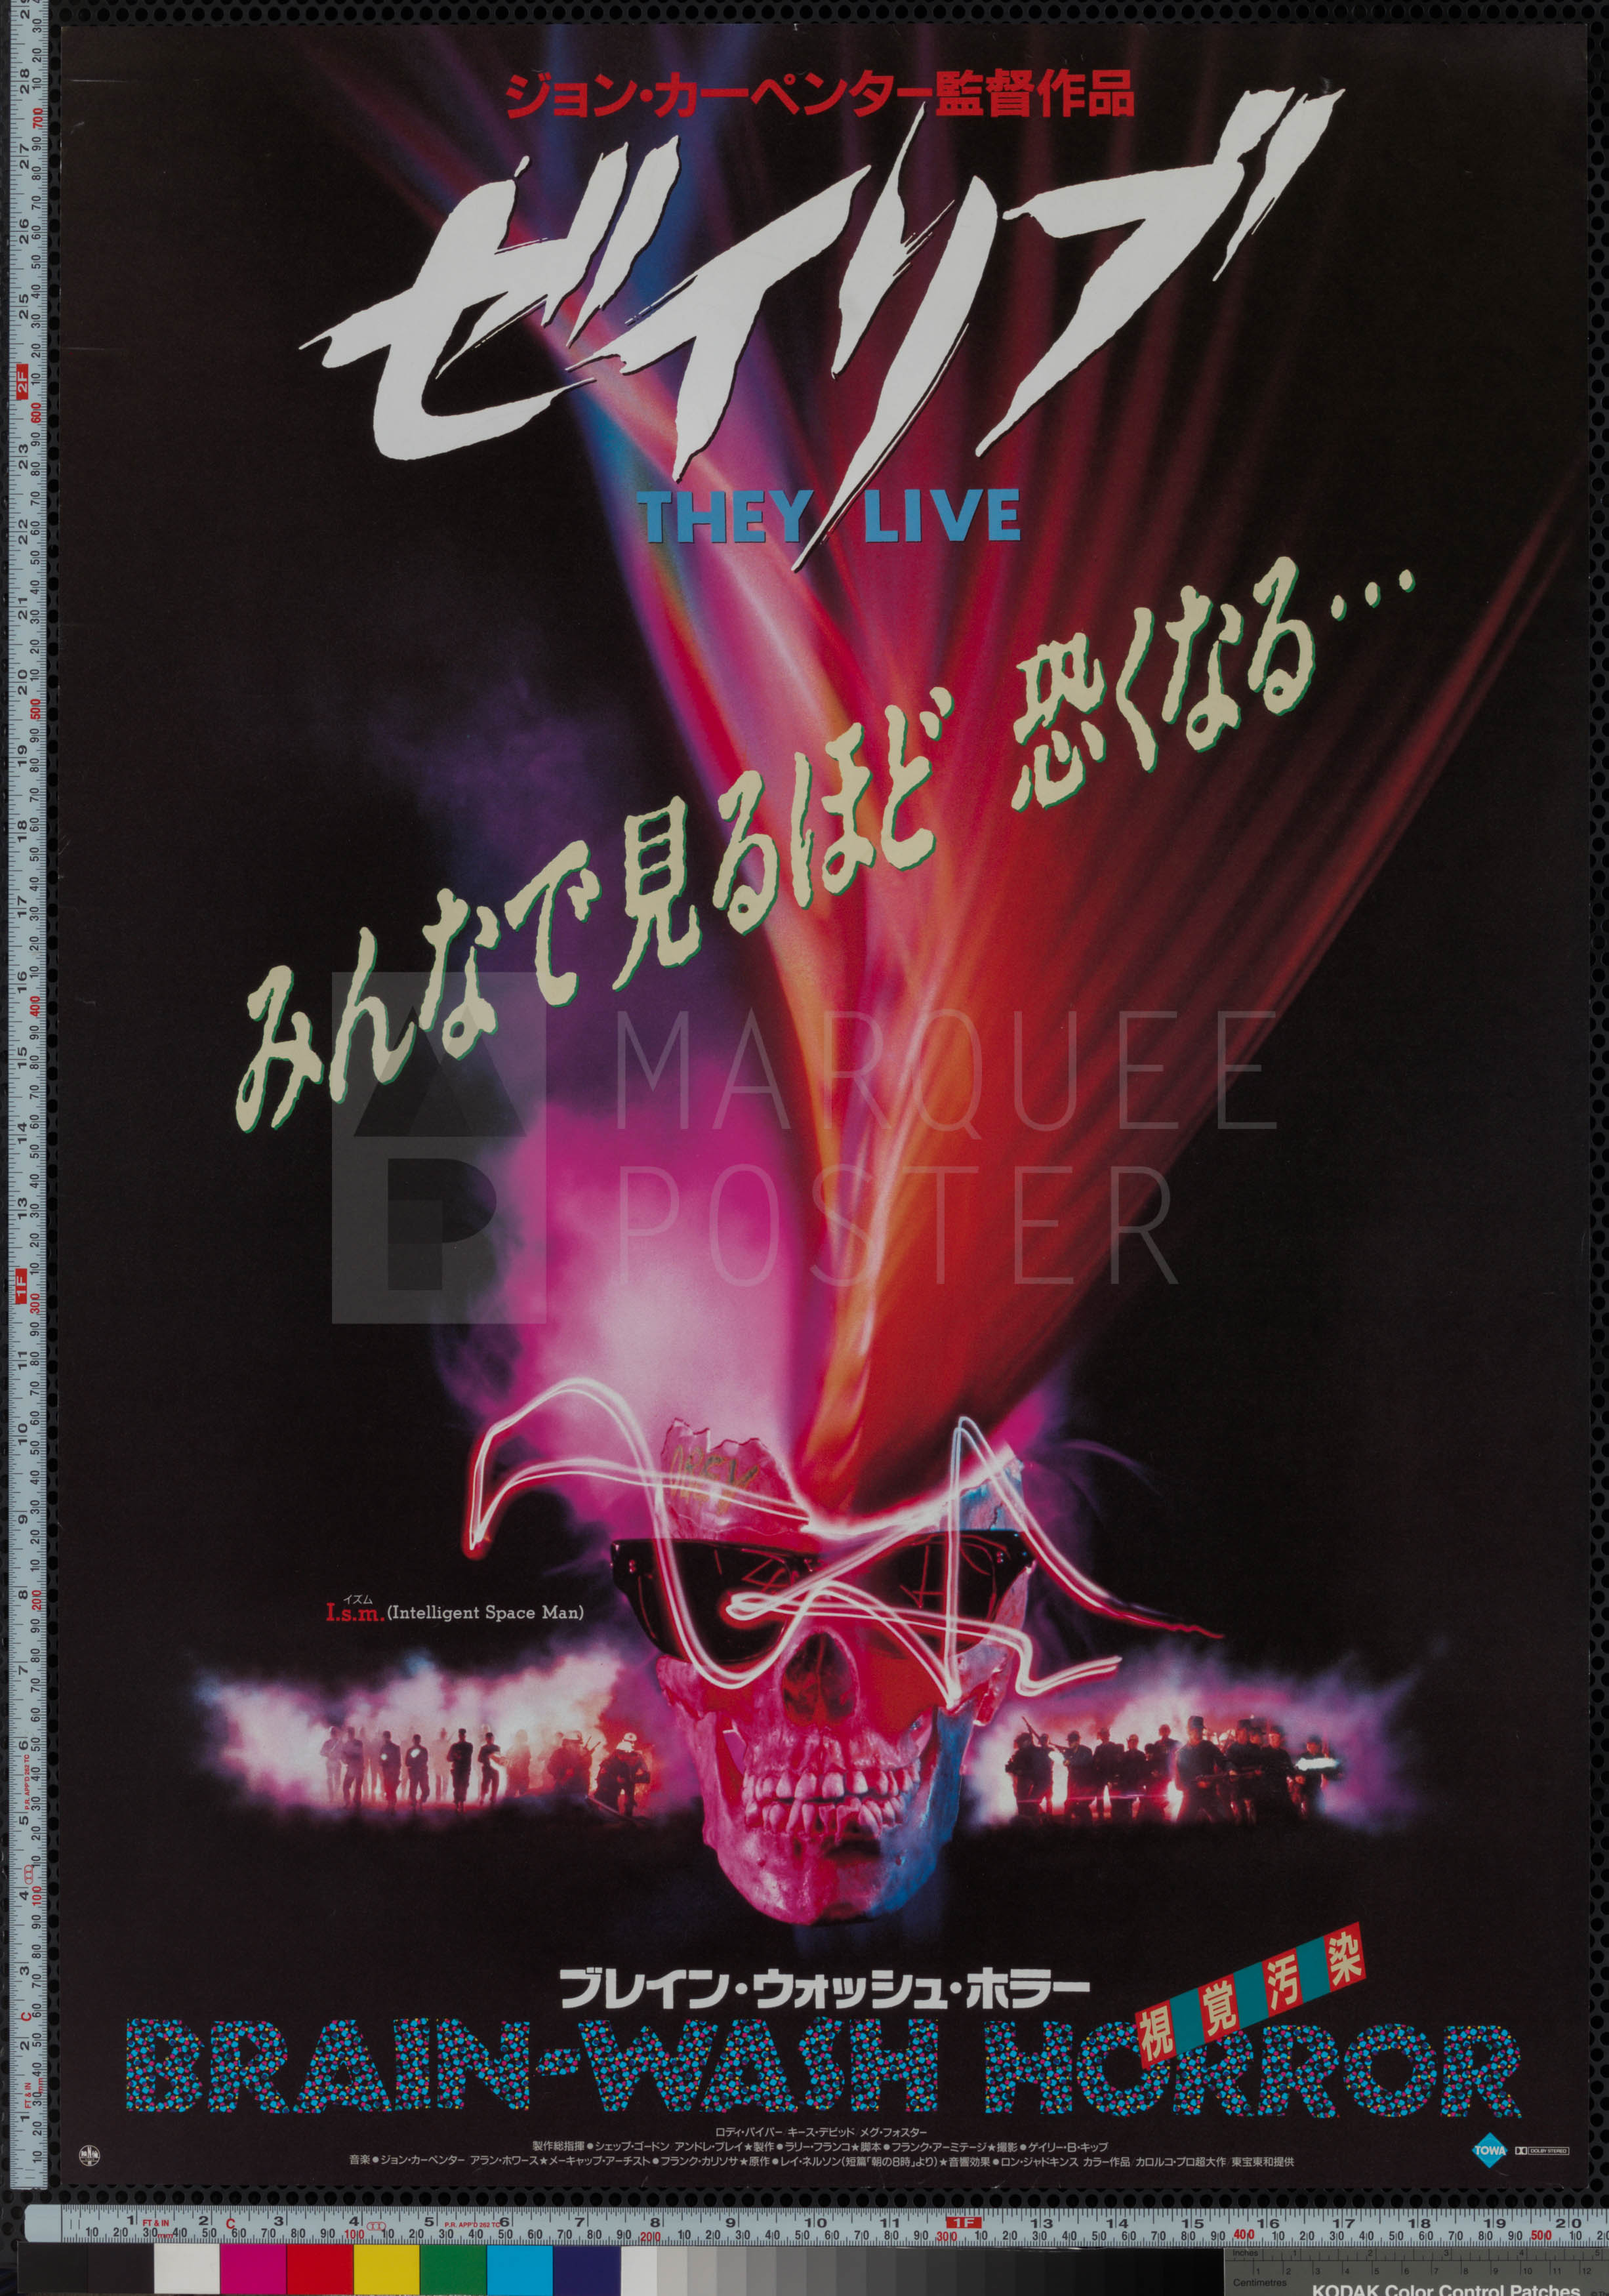 39-they-live-japanese-b2-1988-02